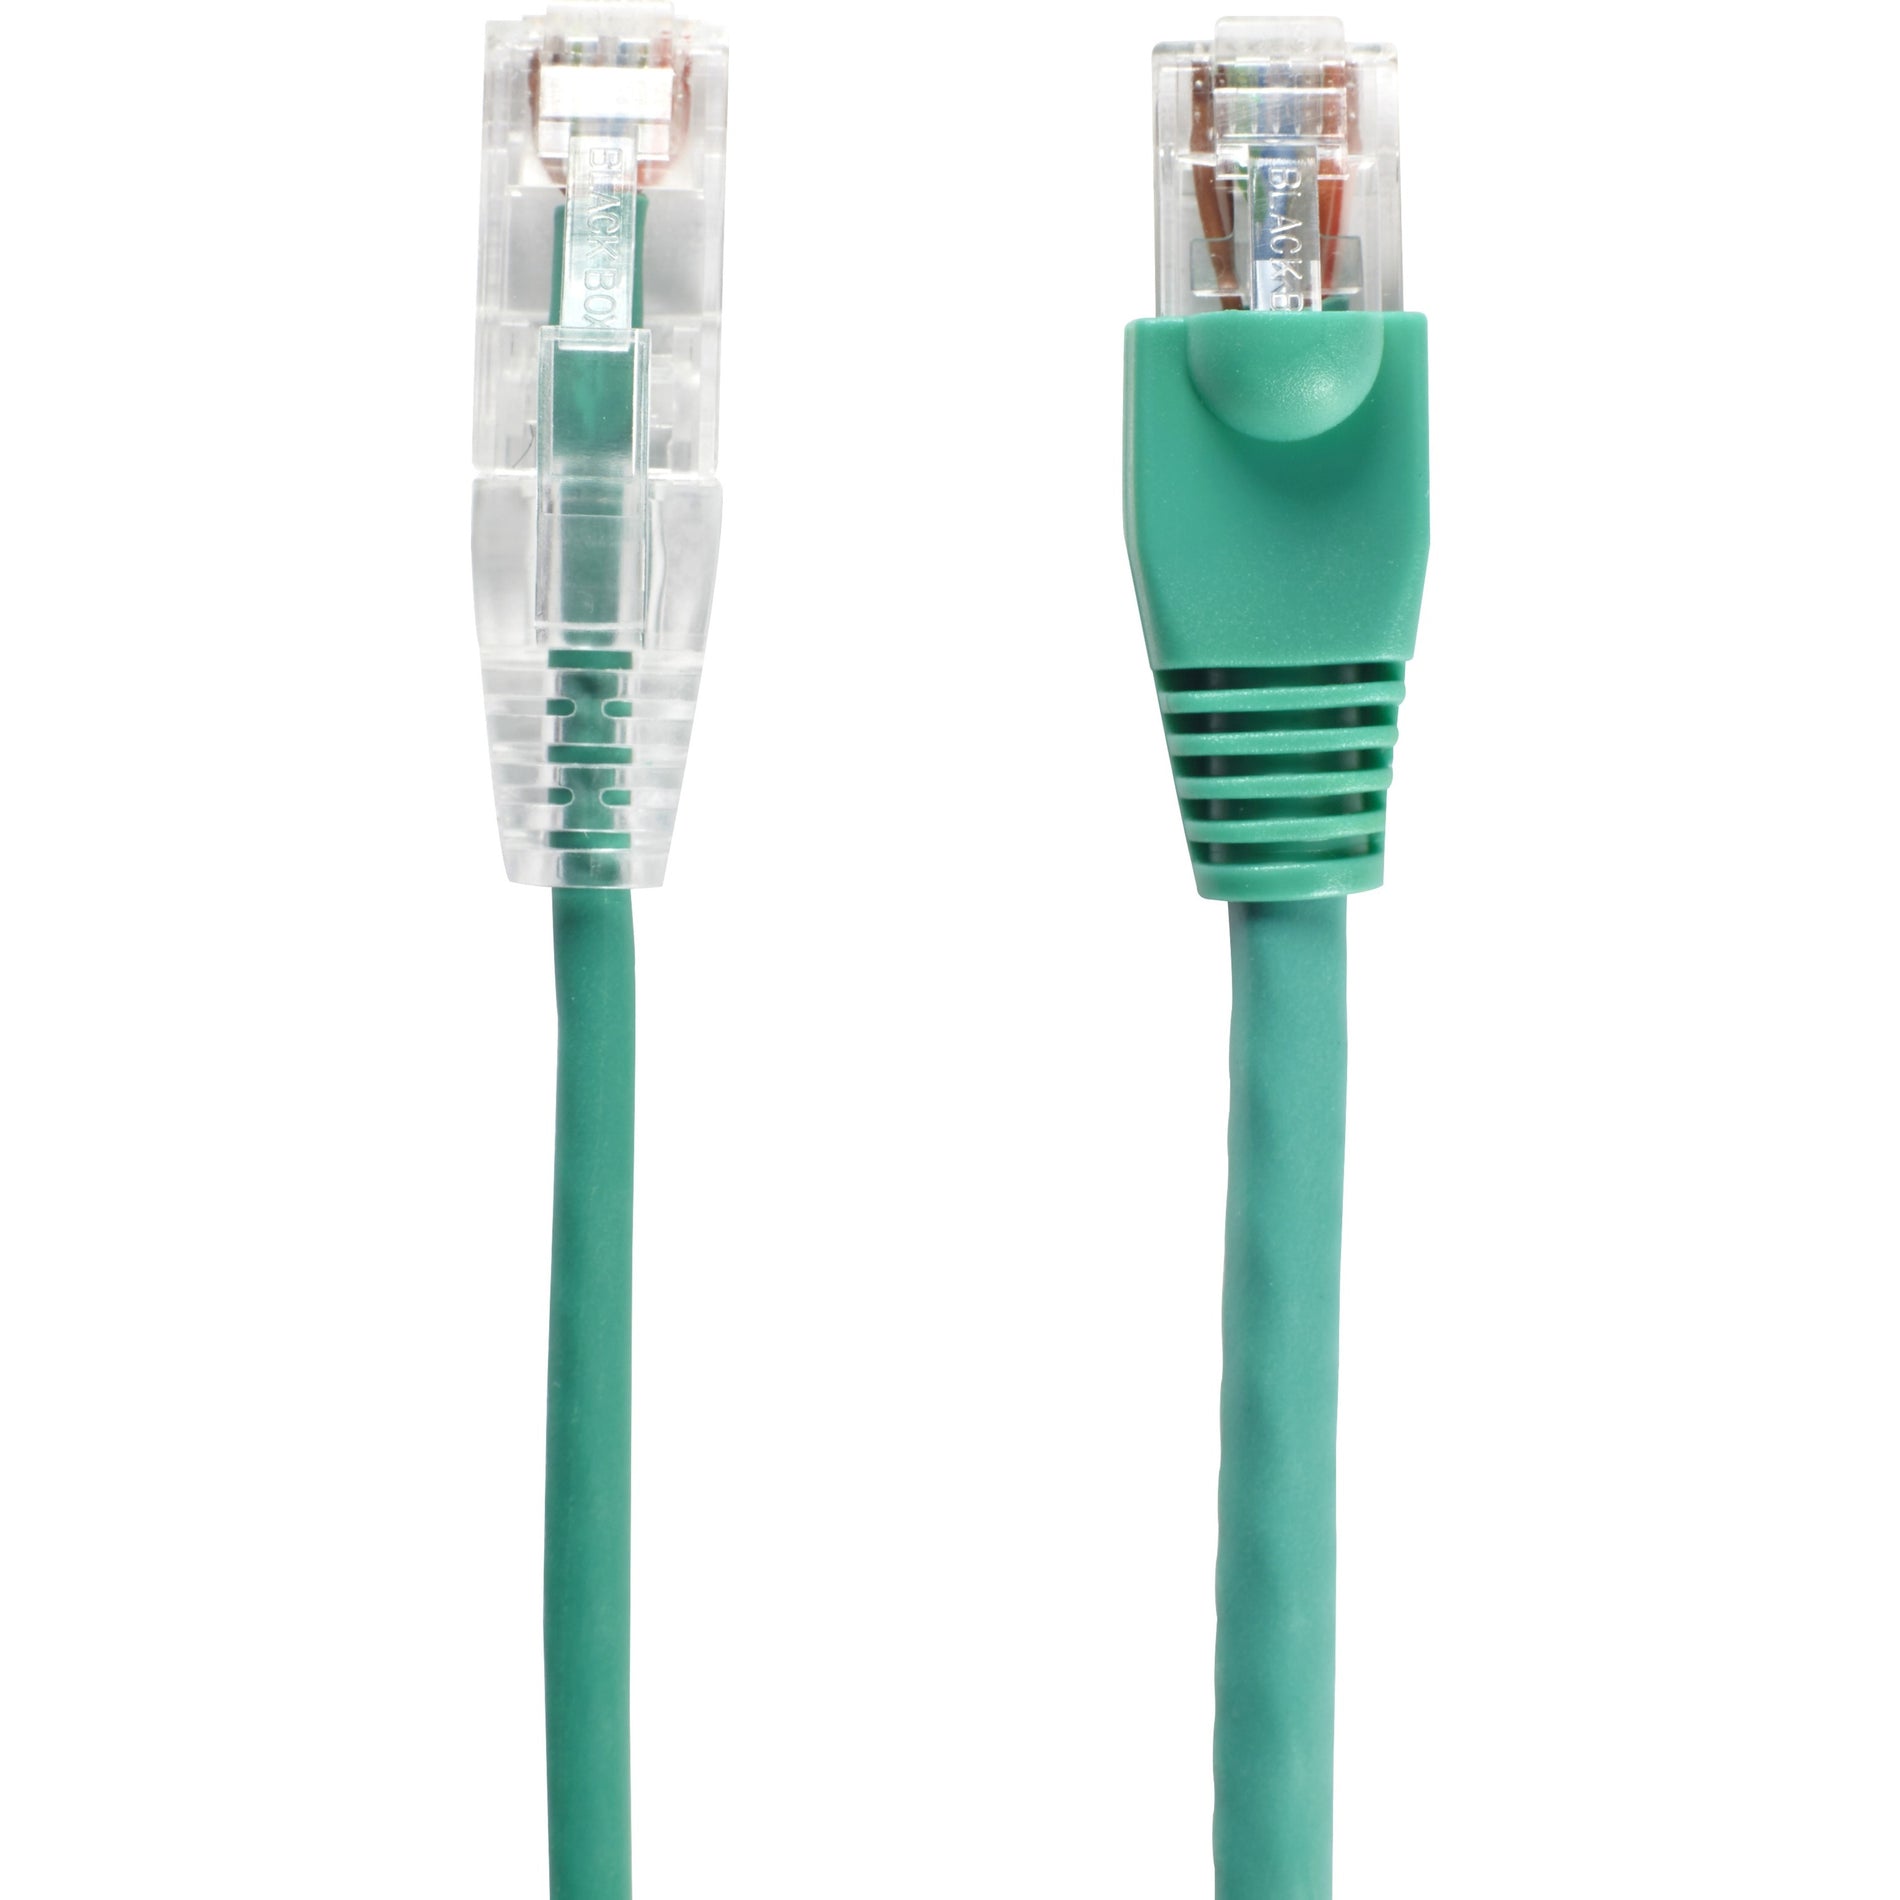 Black Box C6PC28-GN-05 Slim-Net Cat.6 UTP Patch Network Cable, 5 ft, Green